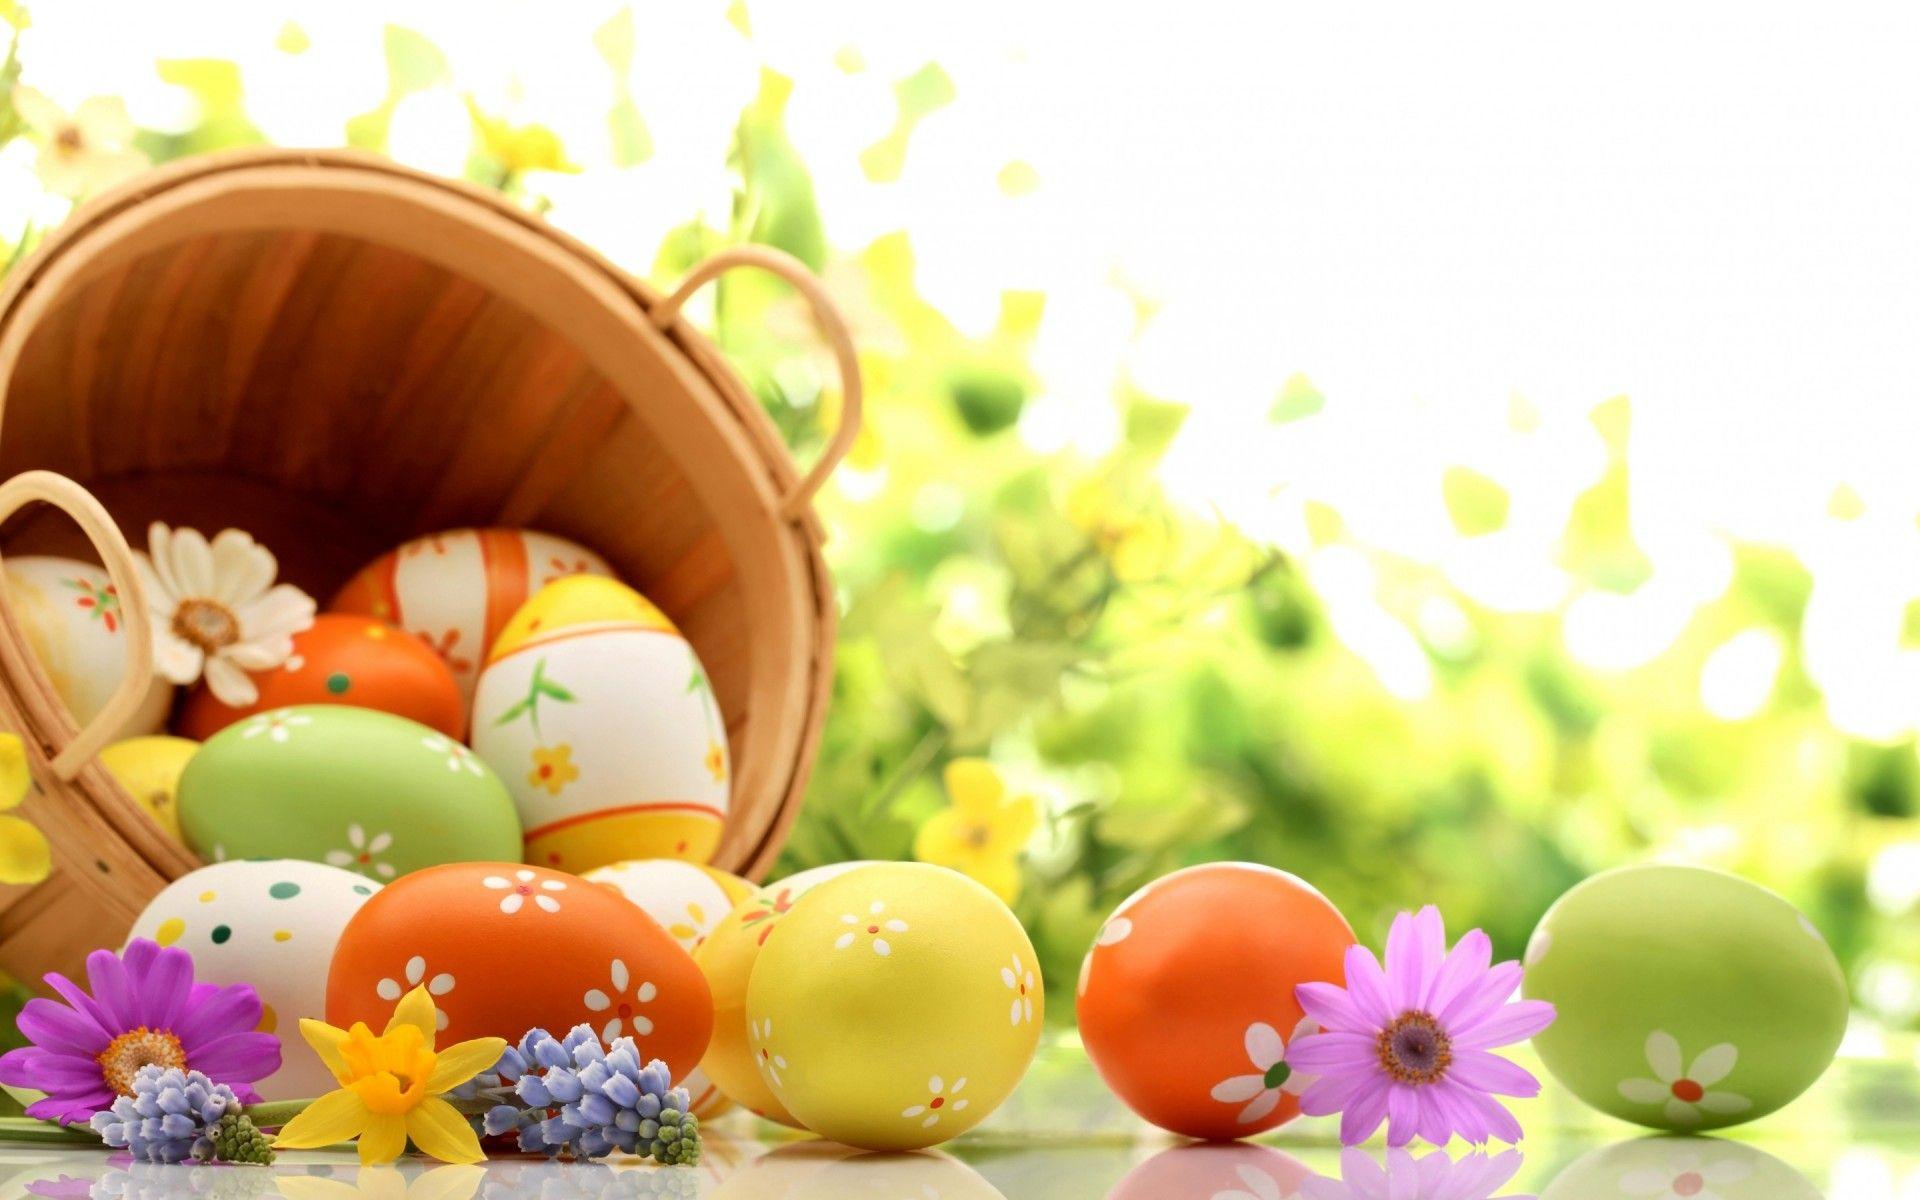 Easter Eggs 2018 Wallpaper HD free download file